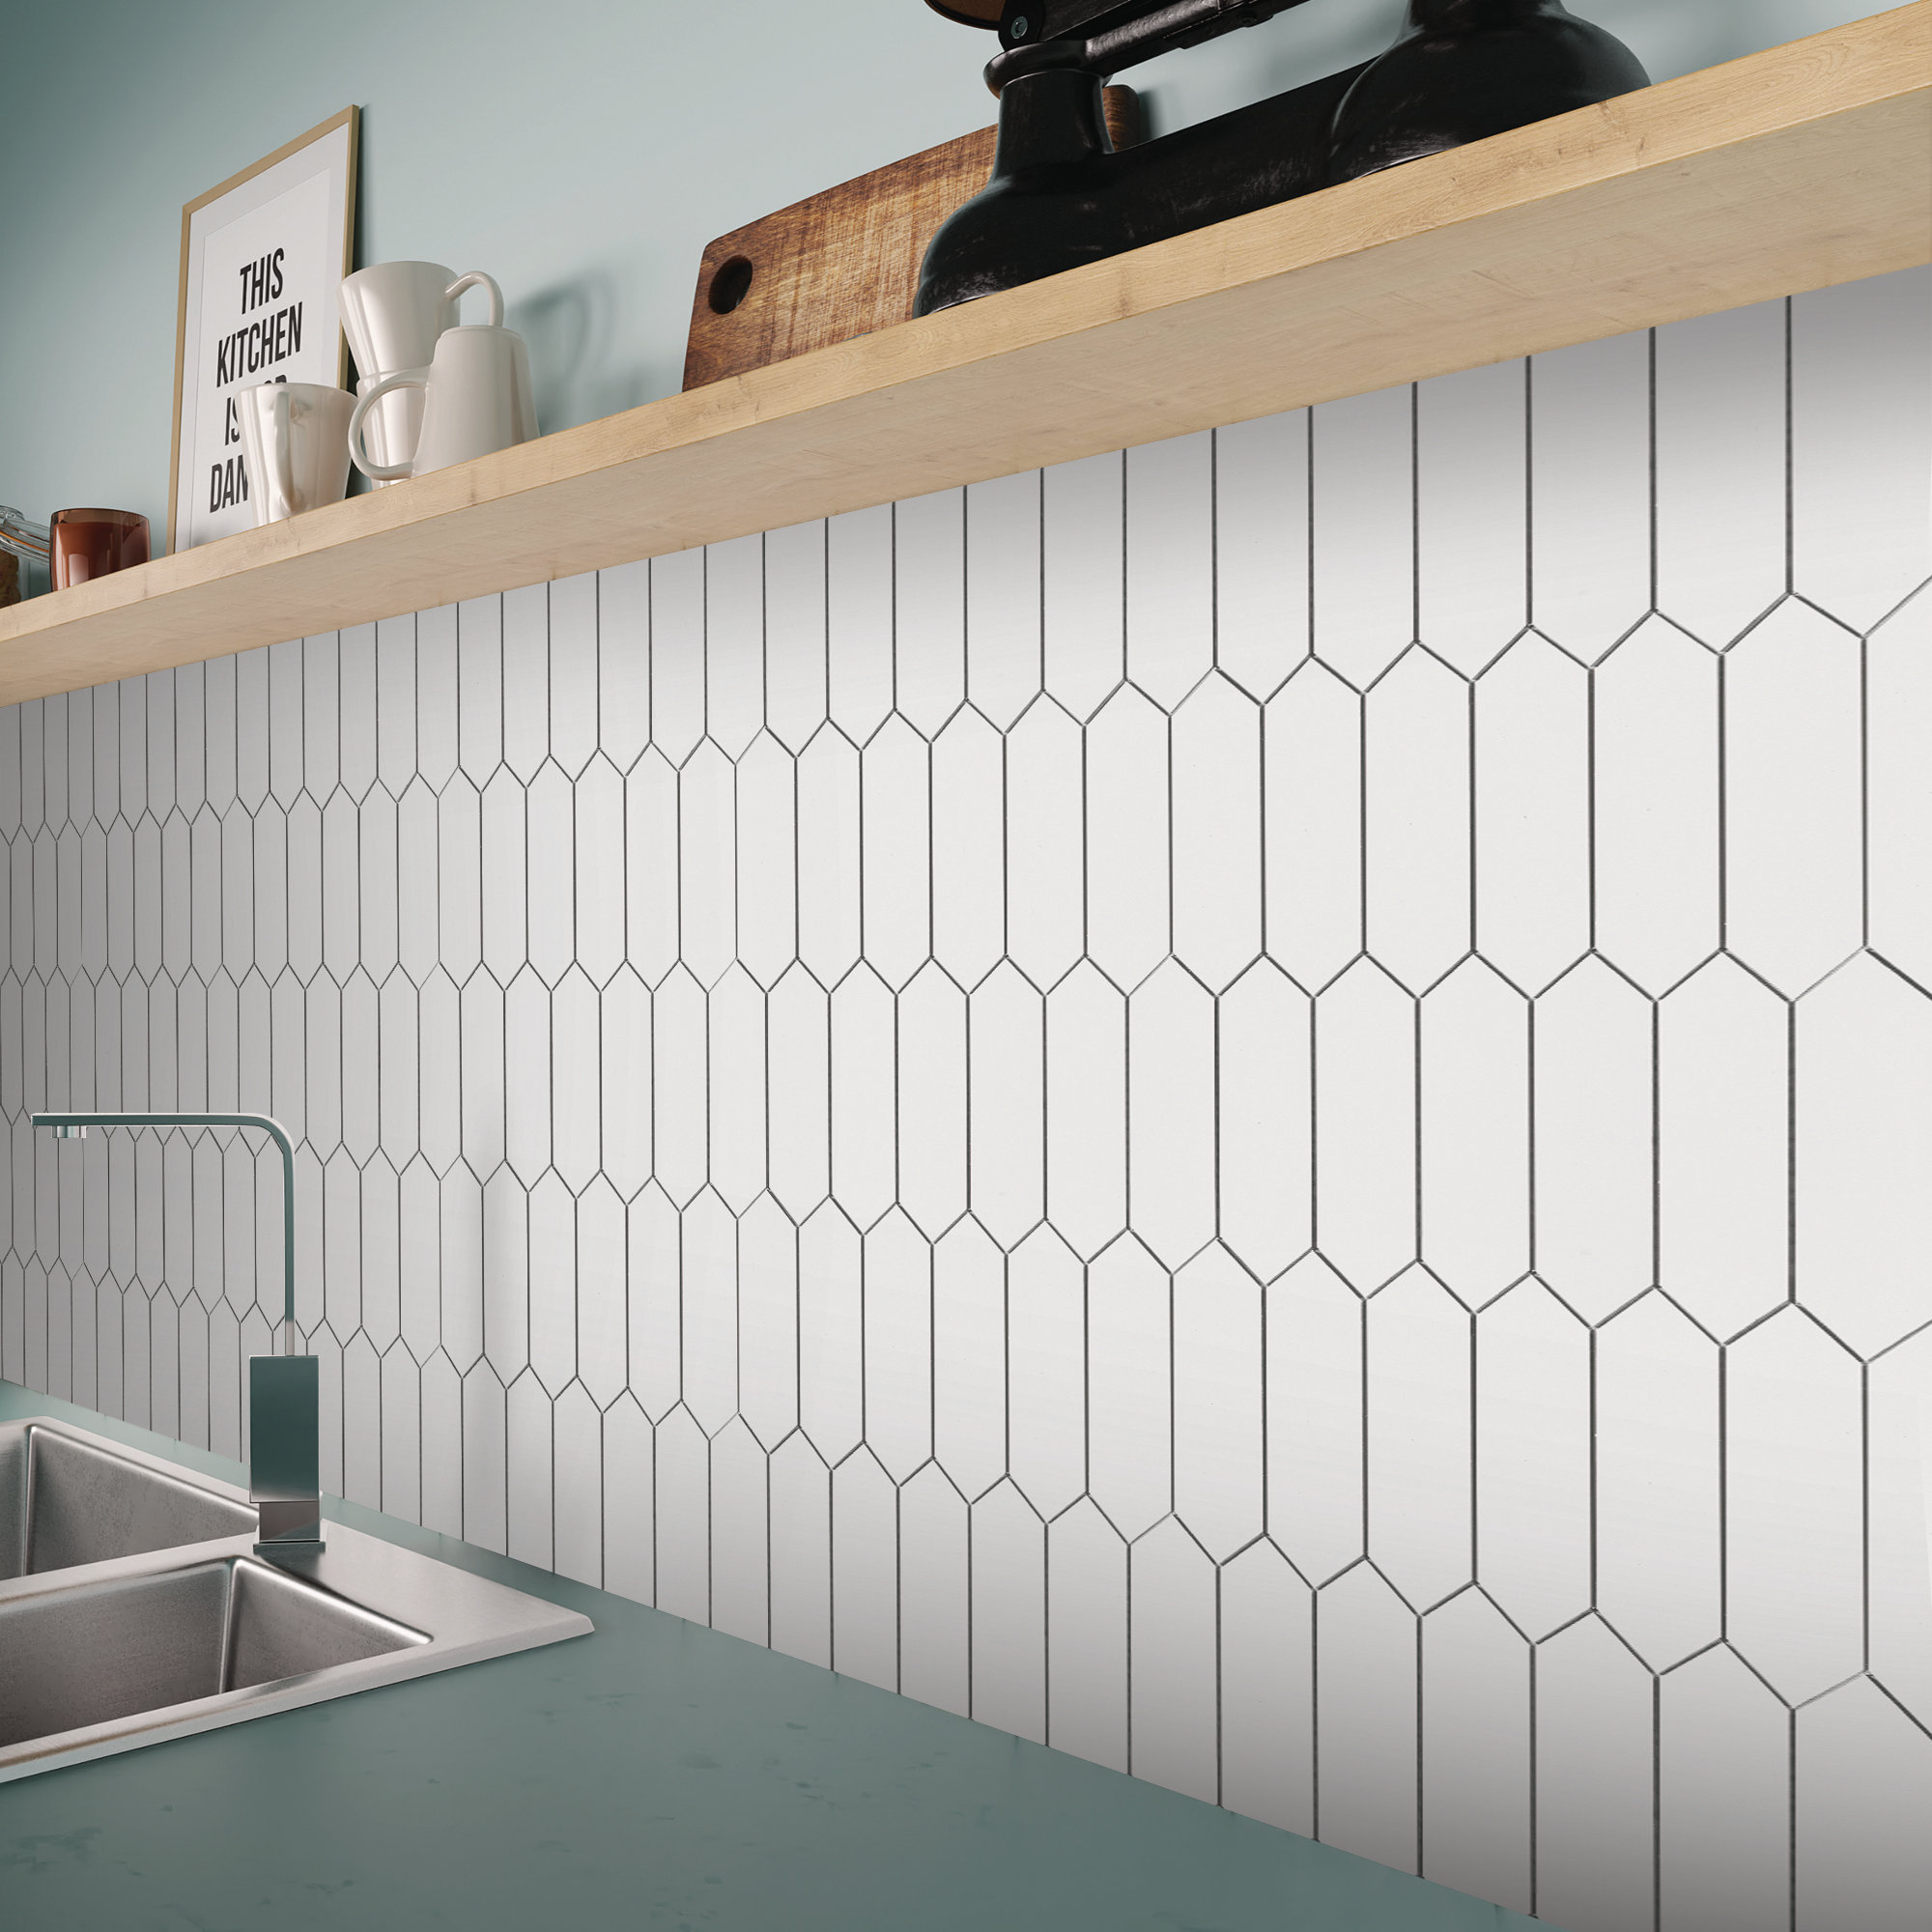 Tools Products - Mosaic Tile Mania